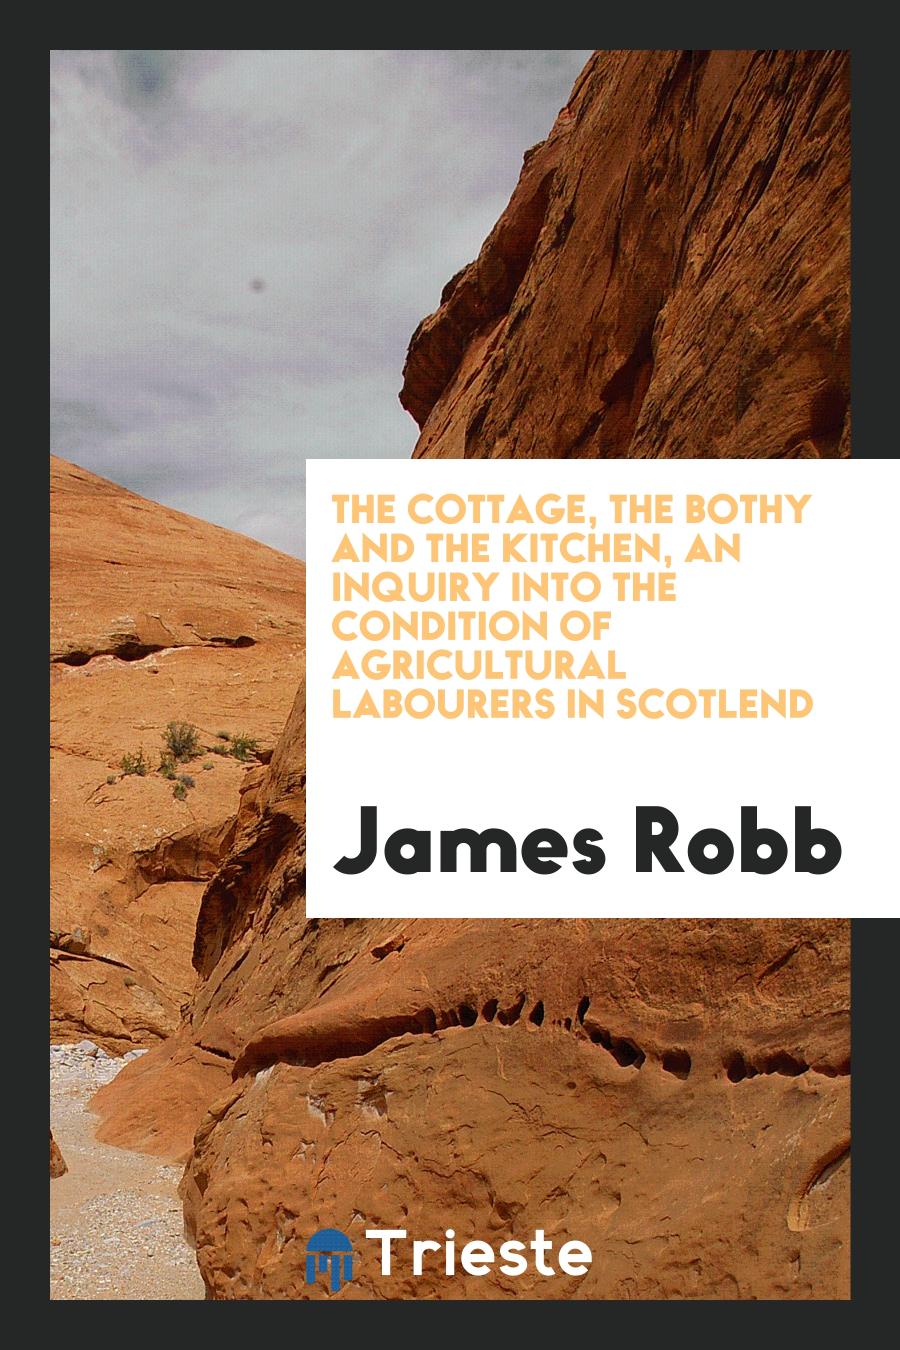 The Cottage, the Bothy and the Kitchen, an Inquiry Into the Condition of Agricultural Labourers in Scotlend